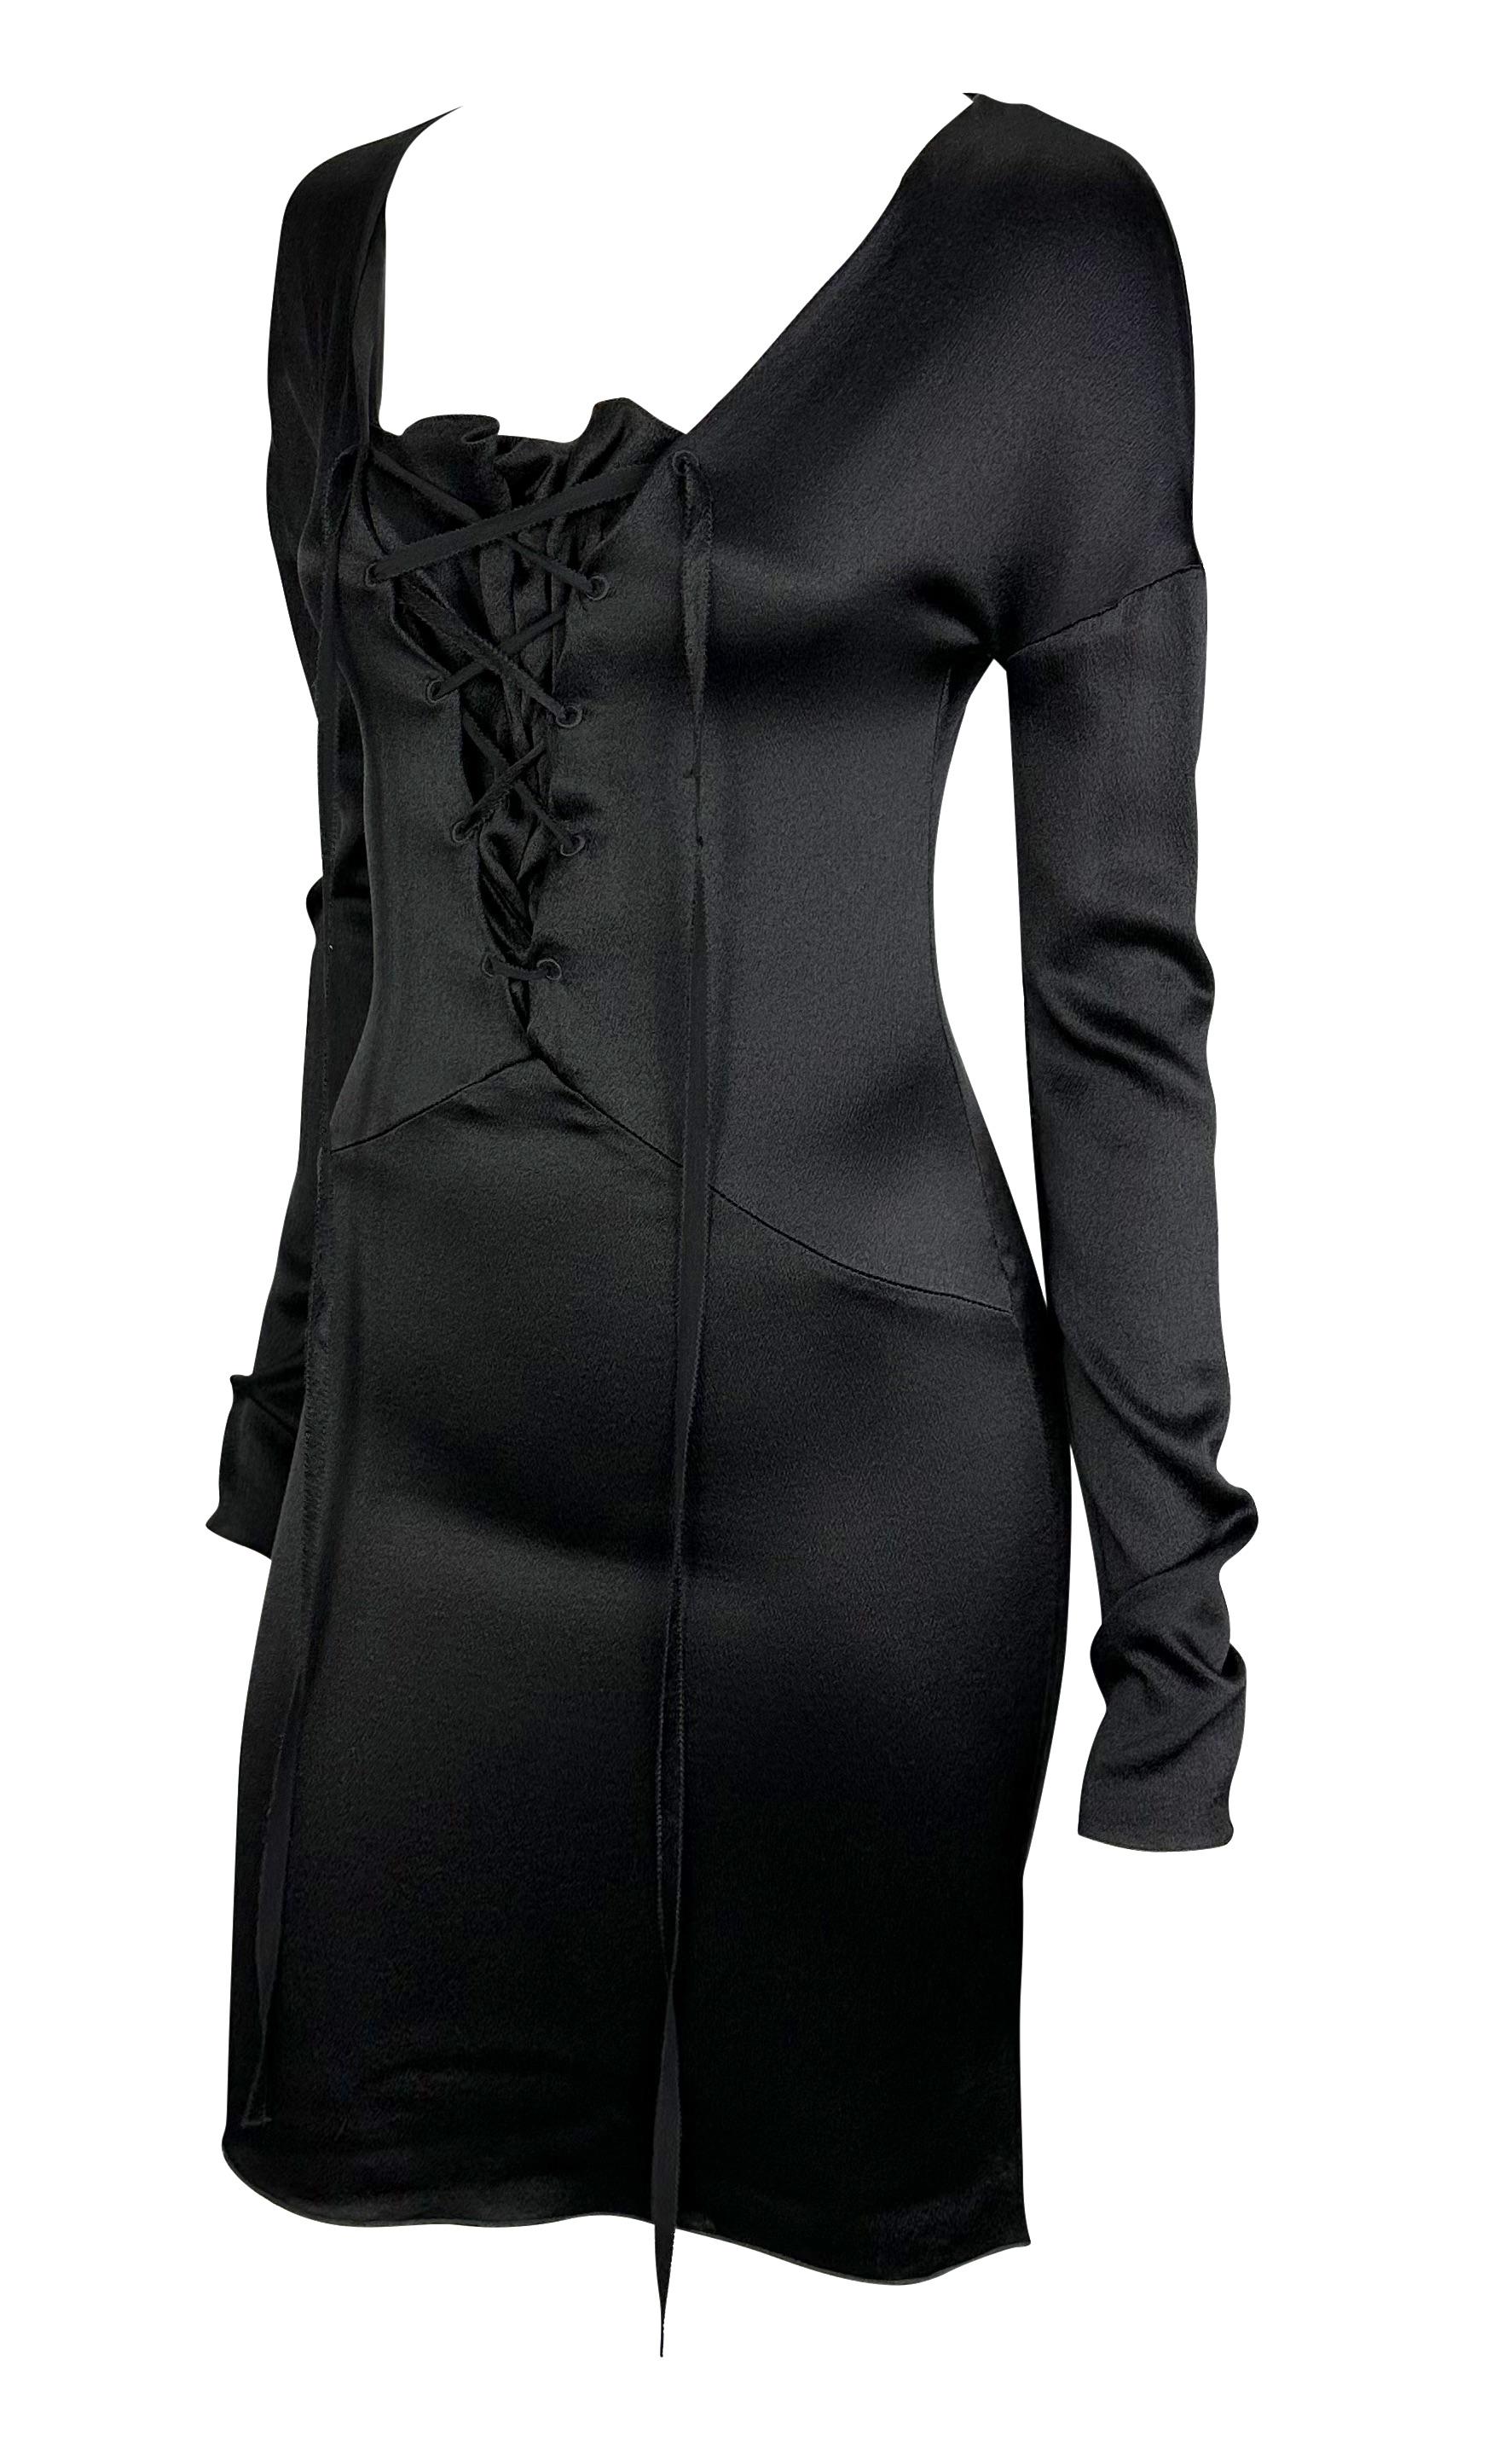 Presenting a punk rock goth-inspired Gucci mini dress designed by Tom Ford. From the Fall/Winter 2002 collection, this silk dress features a lace-up center and long sleeves. Both the hem and the cuffs feature a slight flare. One of Tom Ford's